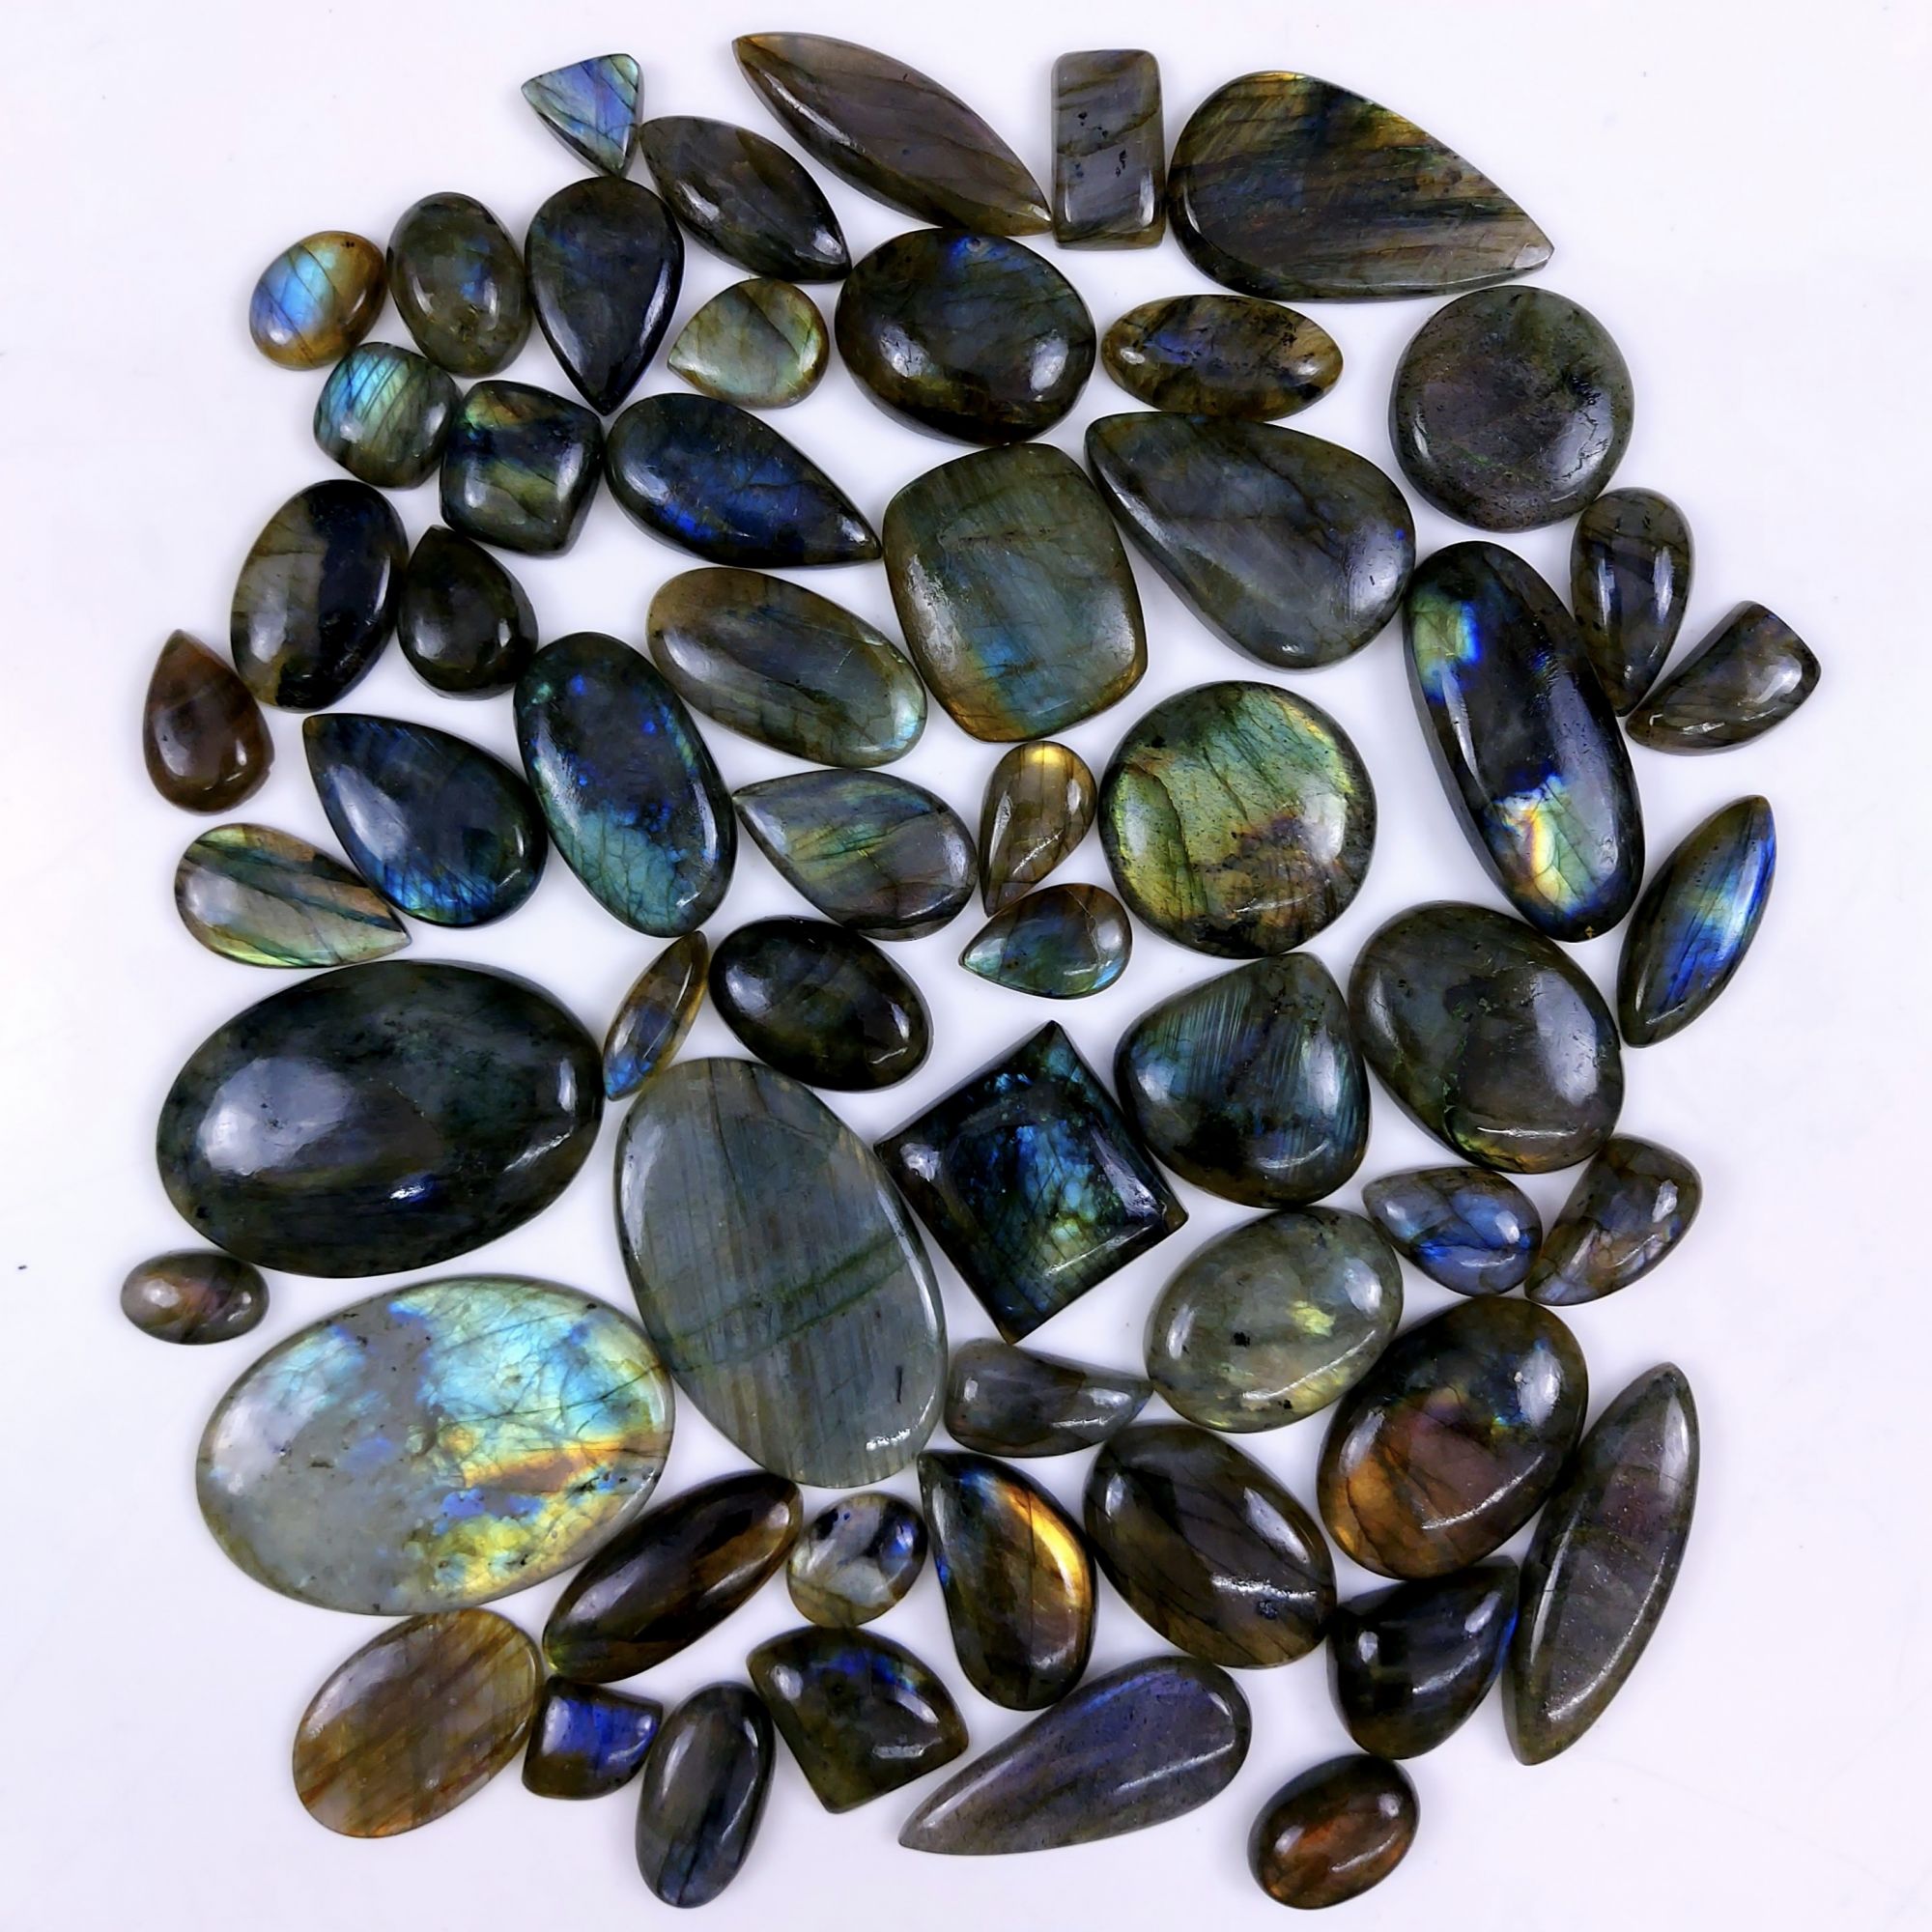 58pc 1800Cts Labradorite Cabochon Multifire Healing Crystal For Jewelry Supplies, Labradorite Necklace Handmade Wire Wrapped Gemstone Pendant 50x40 18x12mm#6293